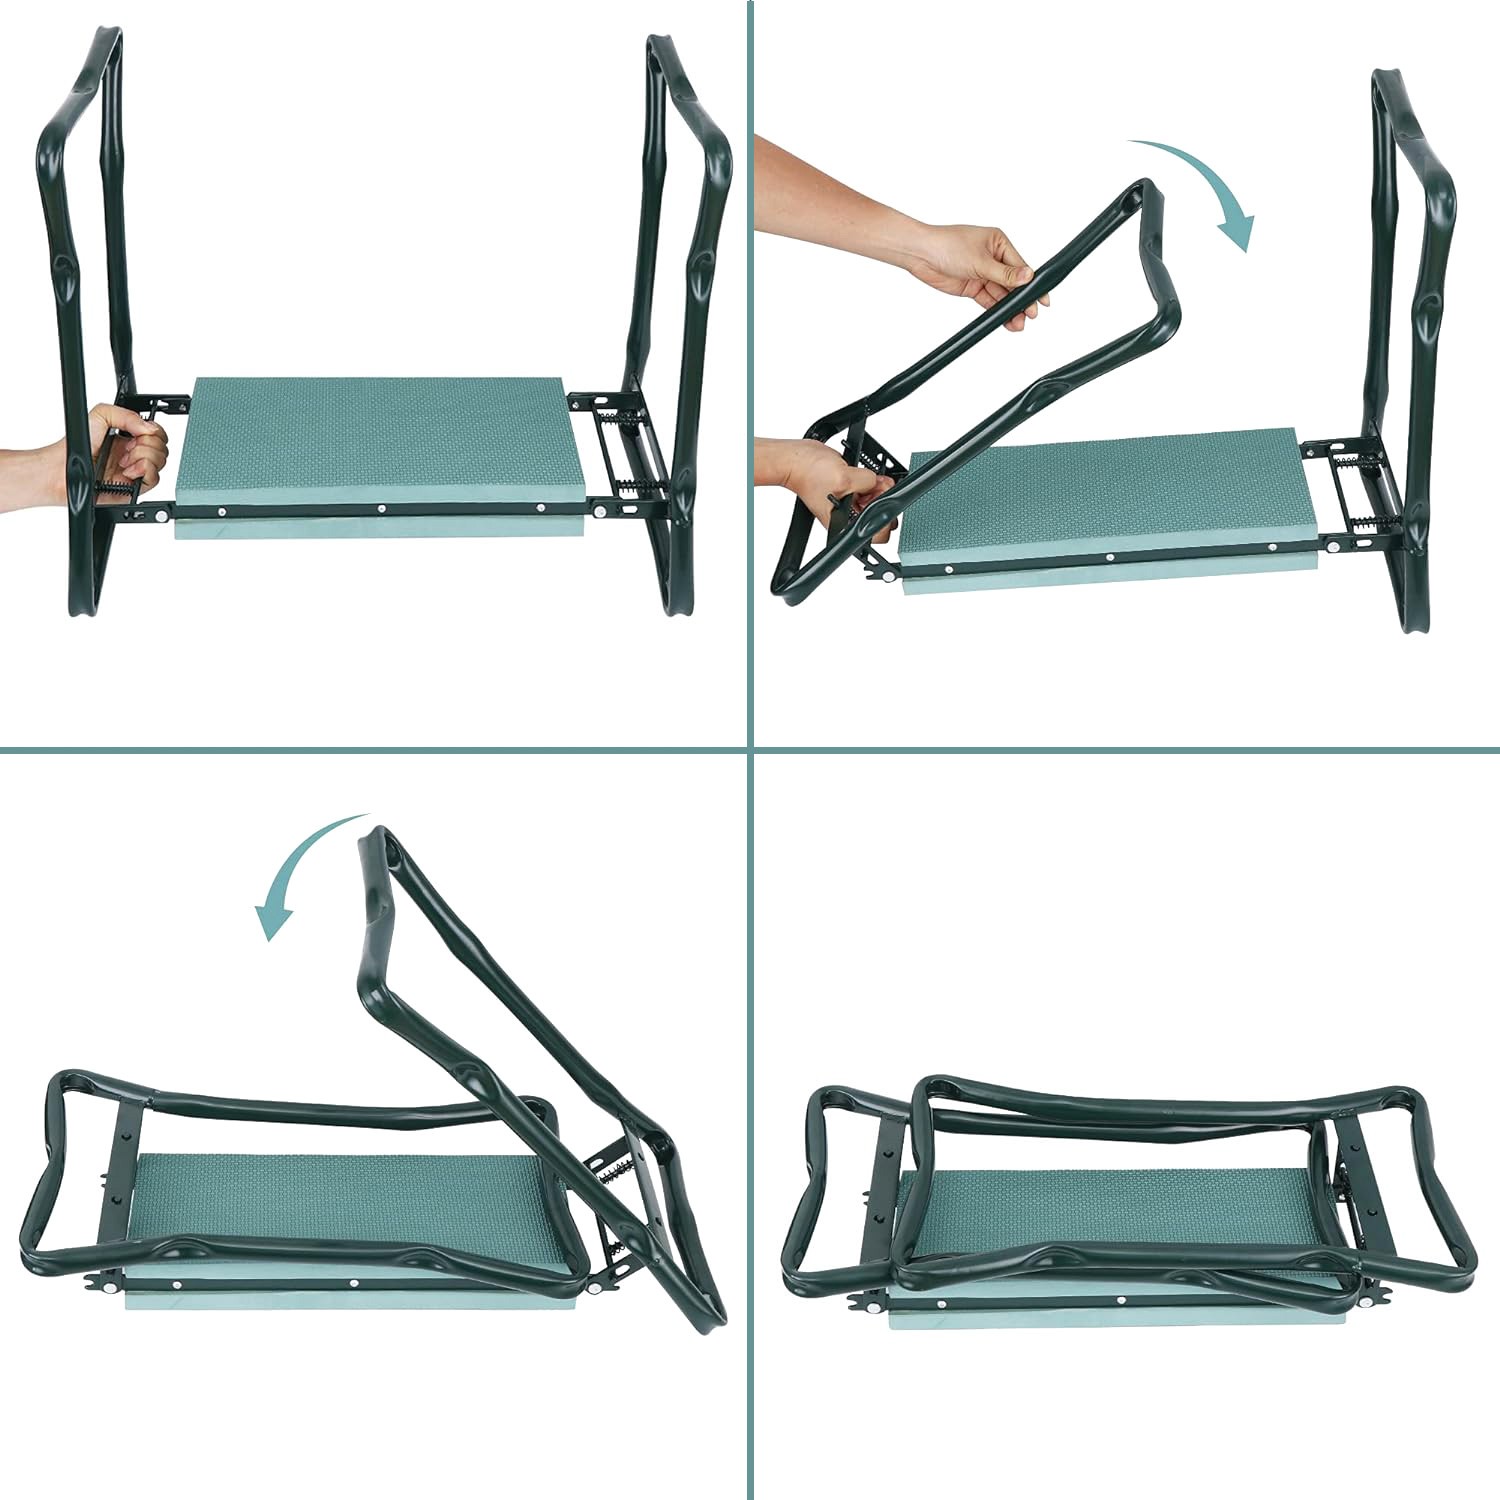 The Florian Garden Kneeler - Perfect for those with Arthritis and Knee Issues